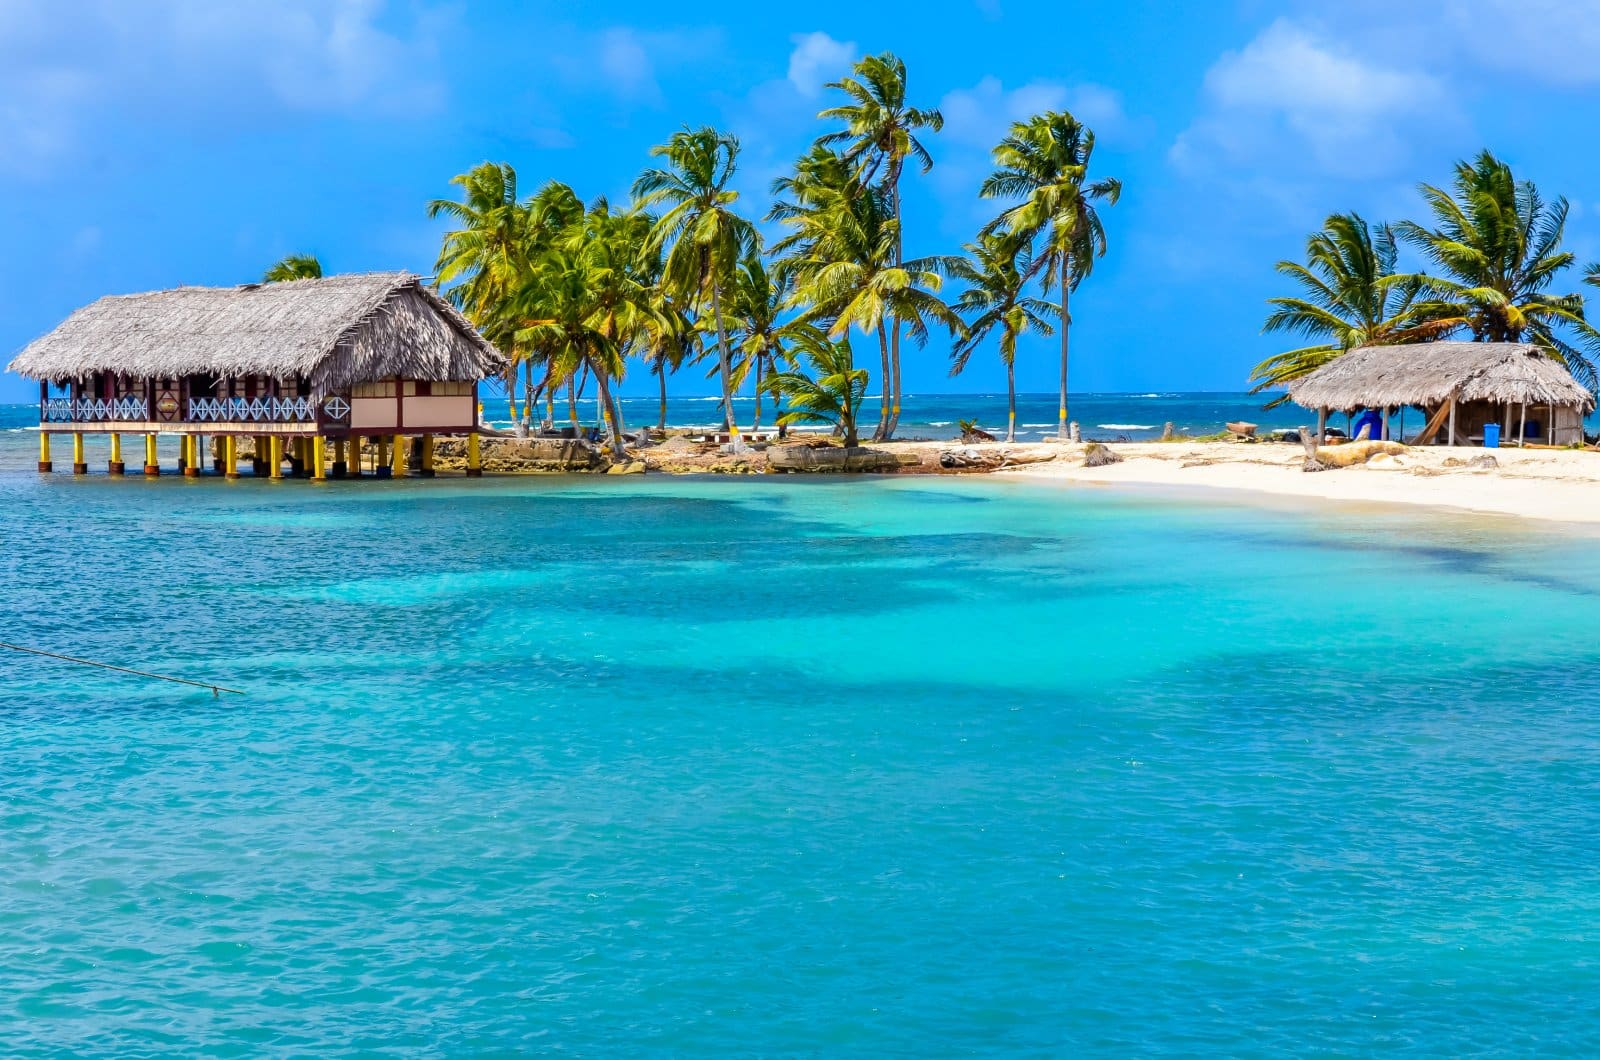 <p class="wp-caption-text">Image Credit: Shutterstock / Simon Dannhauer</p>  <p><span>The San Blas Islands, an archipelago off the Caribbean coast of Panama, offer an authentic and beautiful sailing experience. Governed by the indigenous Guna people, the area remains one of the most unspoiled and secluded in the Caribbean. With over 365 islands, of which only a fraction are inhabited, sailors can find their own private paradise among the crystal-clear waters and pristine white-sand beaches. The region is also known for its vibrant marine life and excellent snorkeling and diving spots.</span></p>